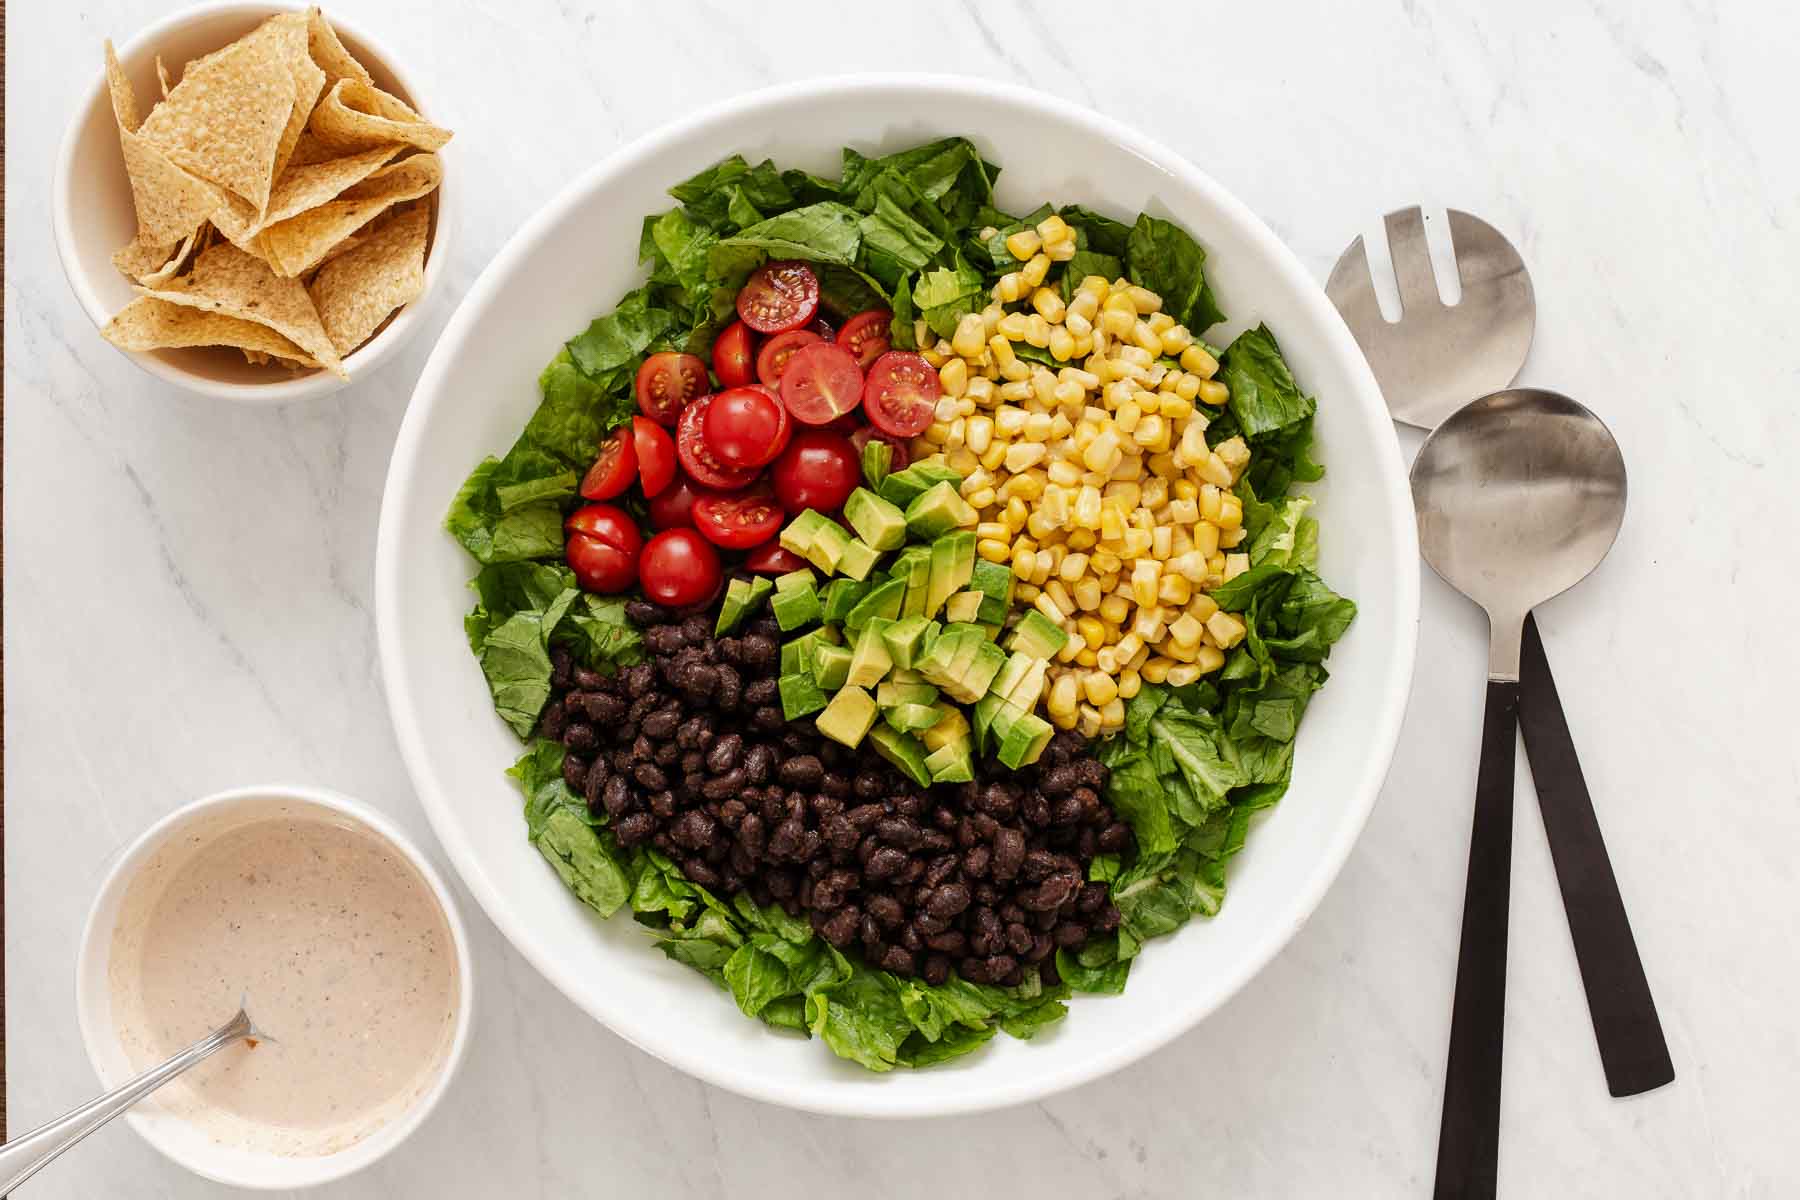 Overhead shot of salad bowl with piles of corn, tomatoes and black beans.